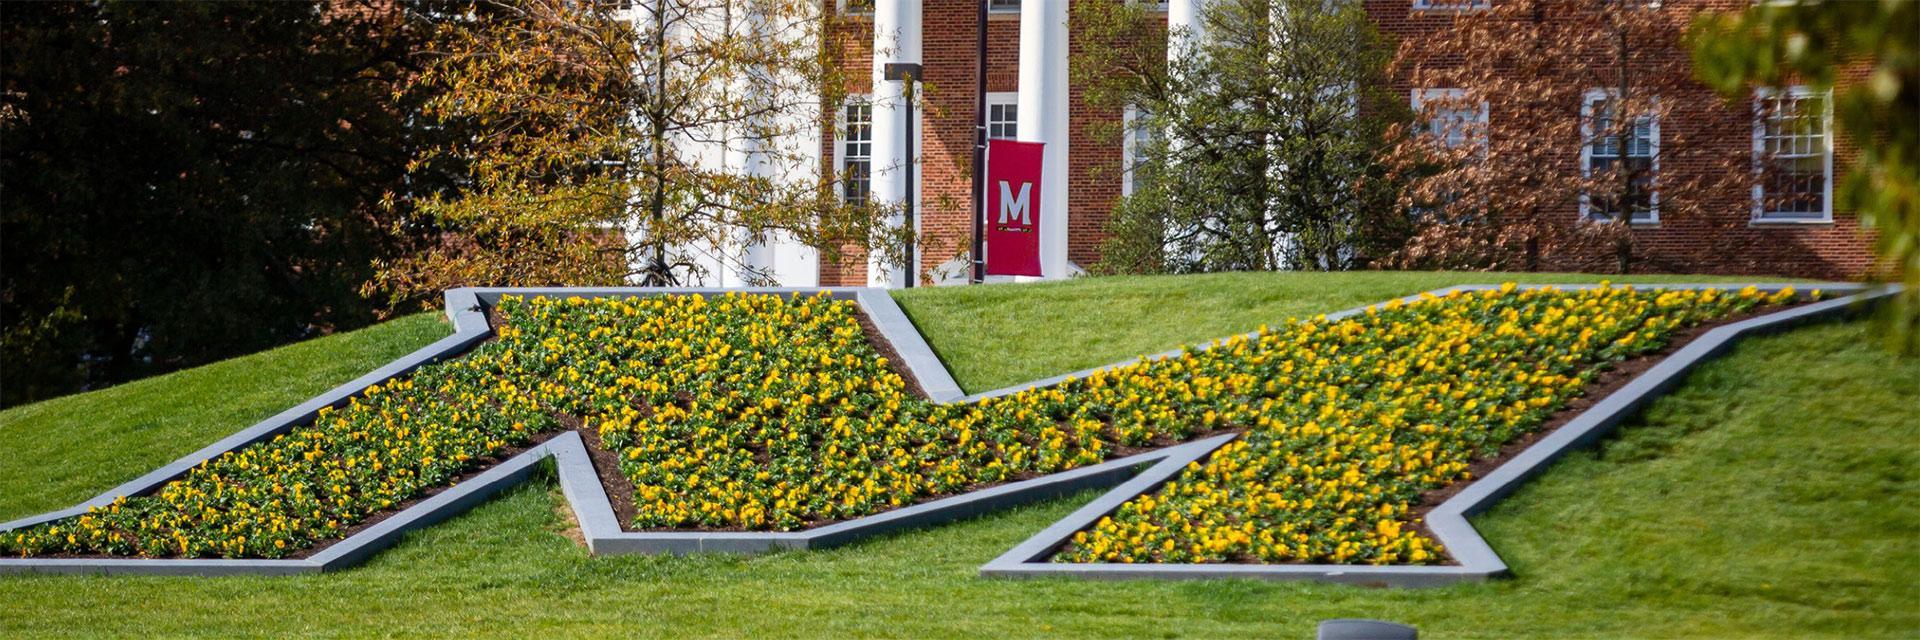 New Picture of Maryland M